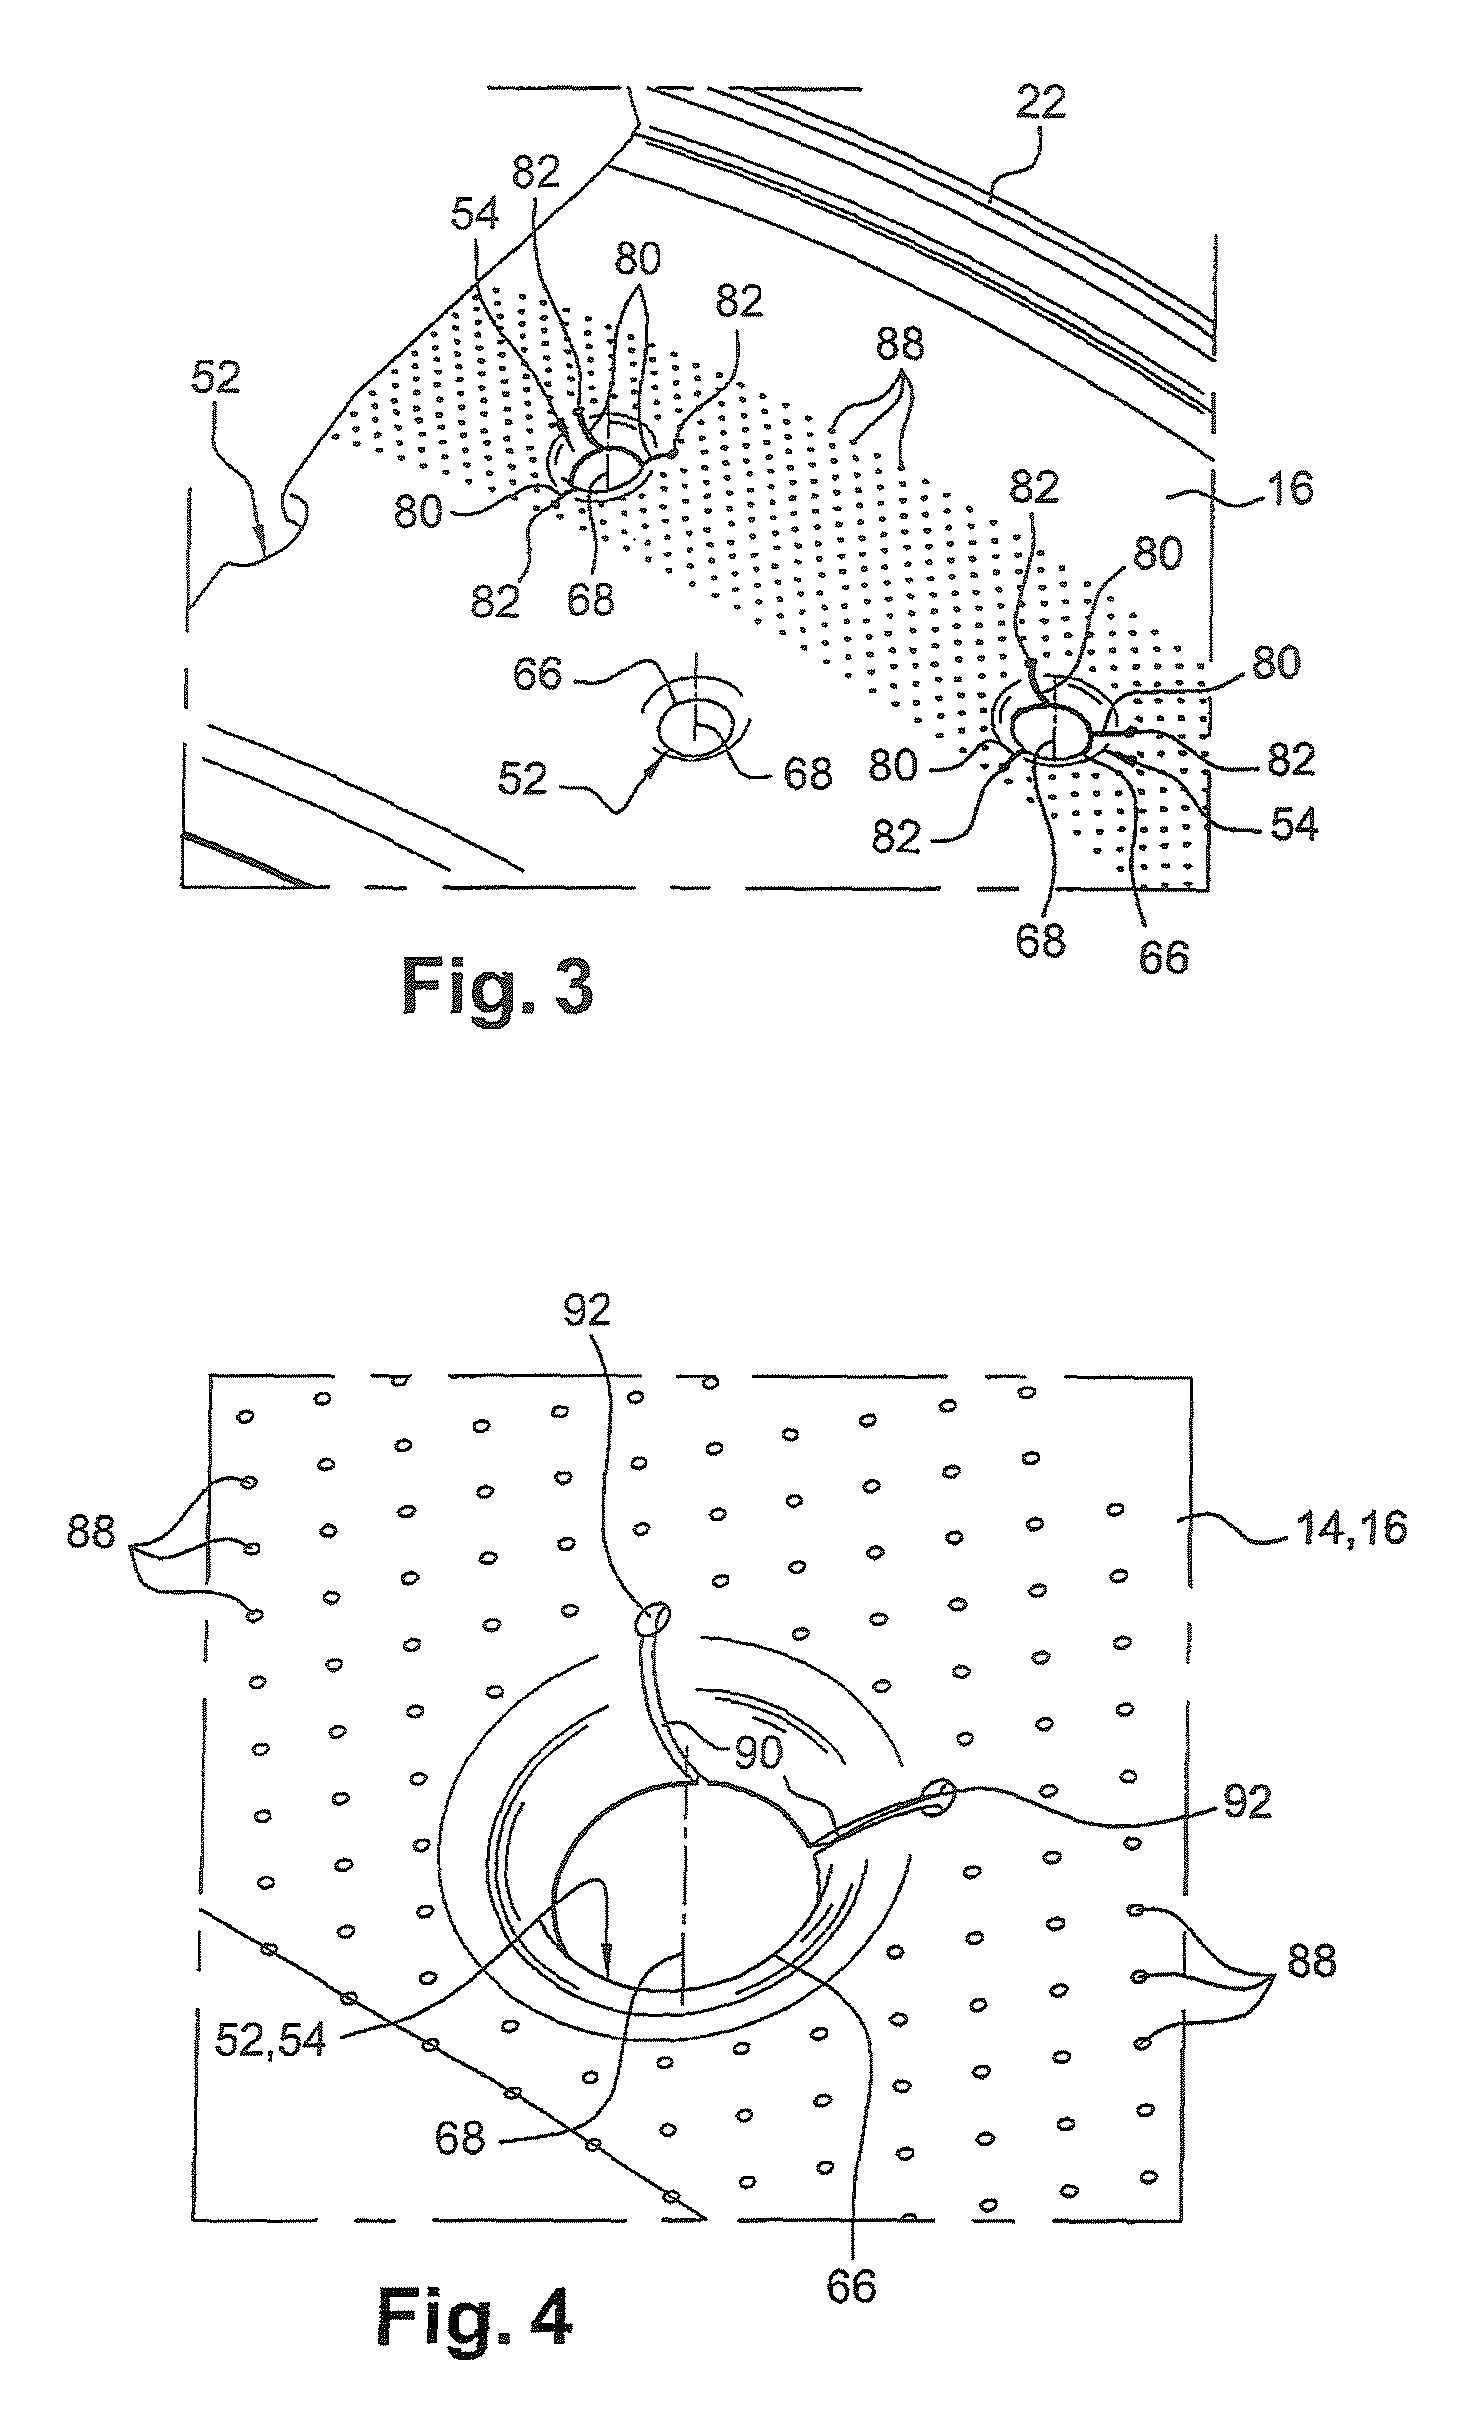 Combustion chamber in a turbomachine